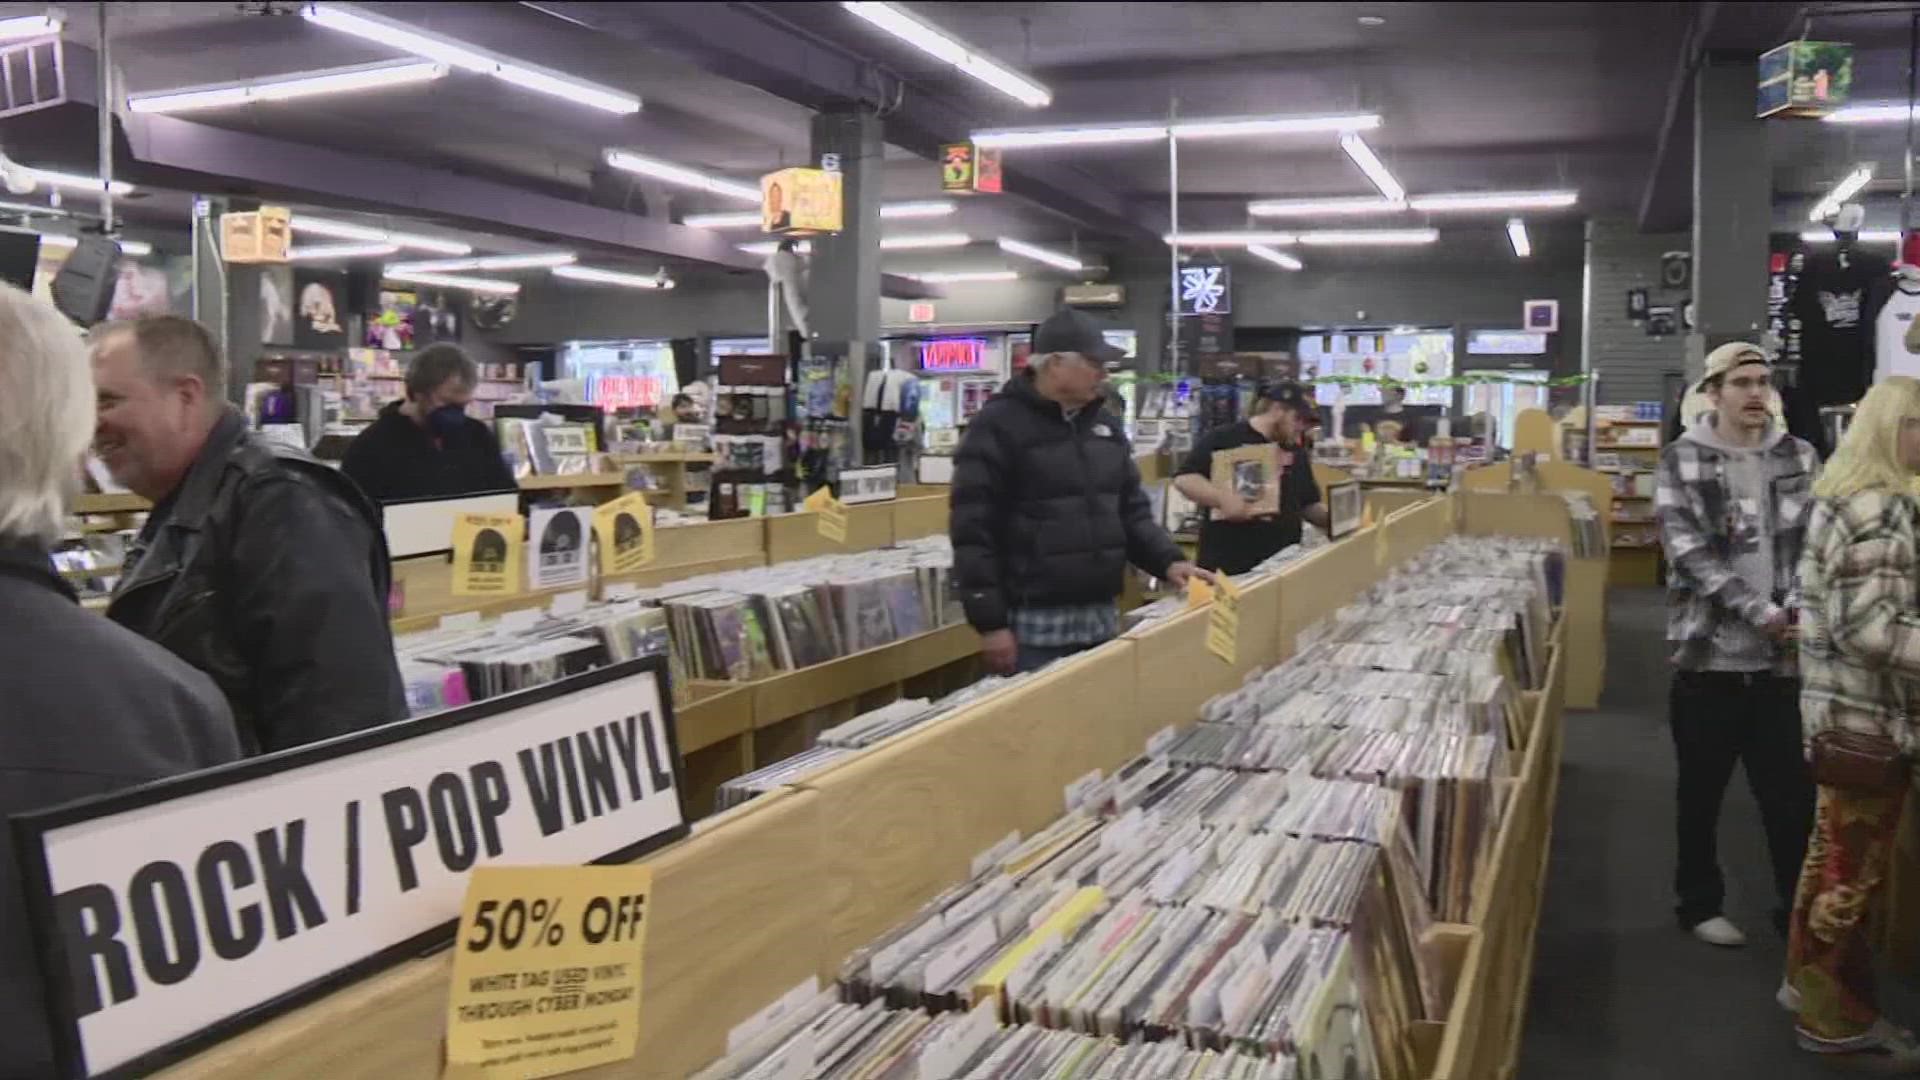 The Record Exchange is one local business that Idahoans can support during the holidays.